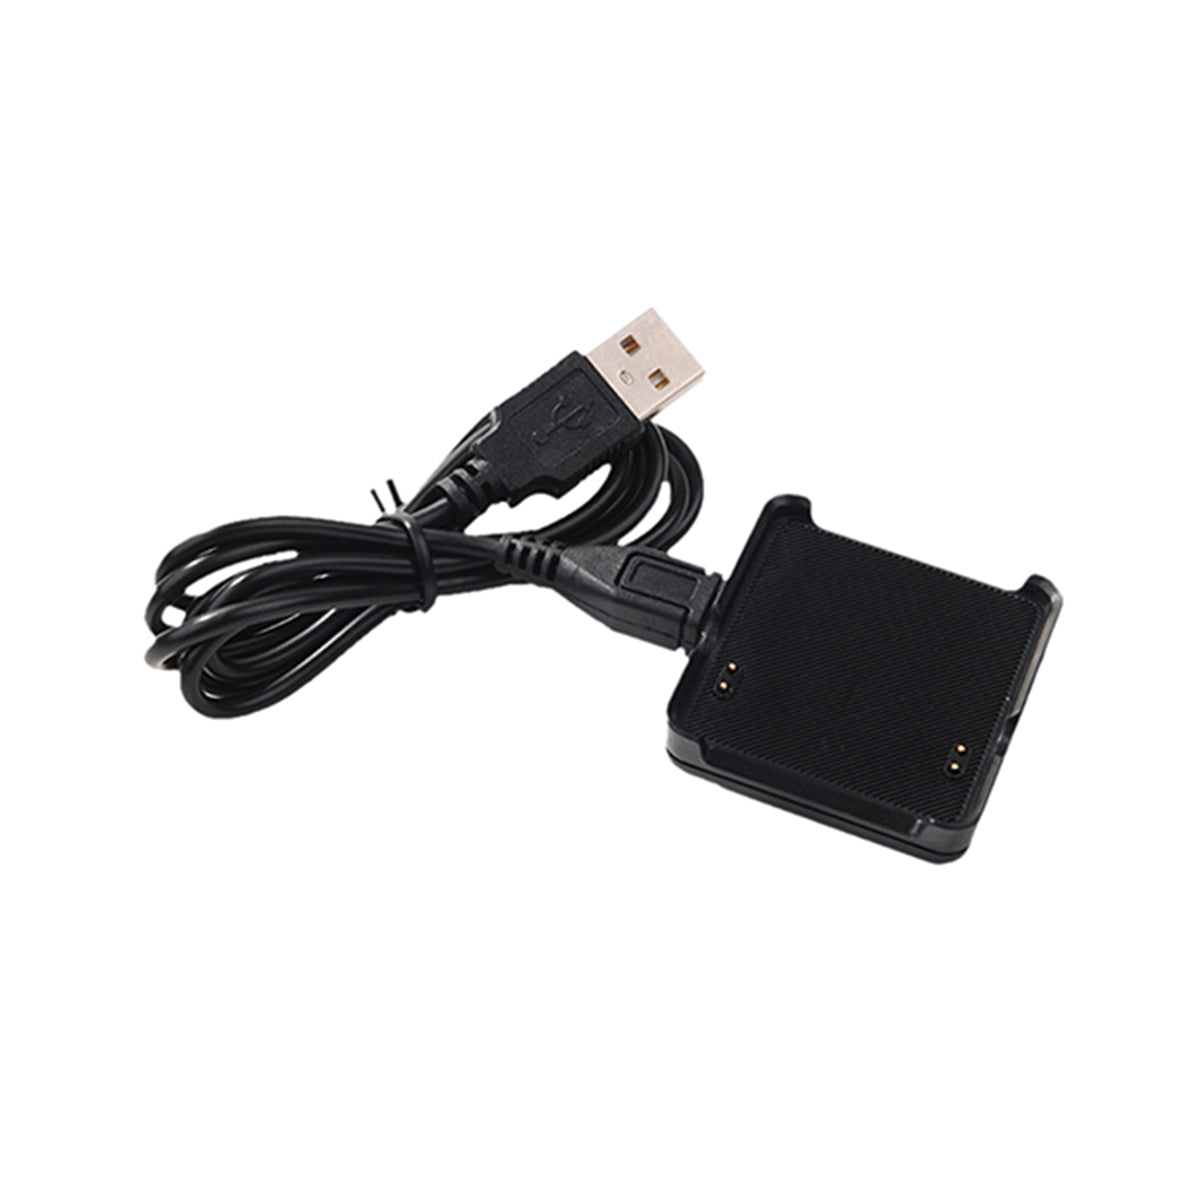 Garmin Vivoactive Charger Cable Replacement Dock 1-Pack  